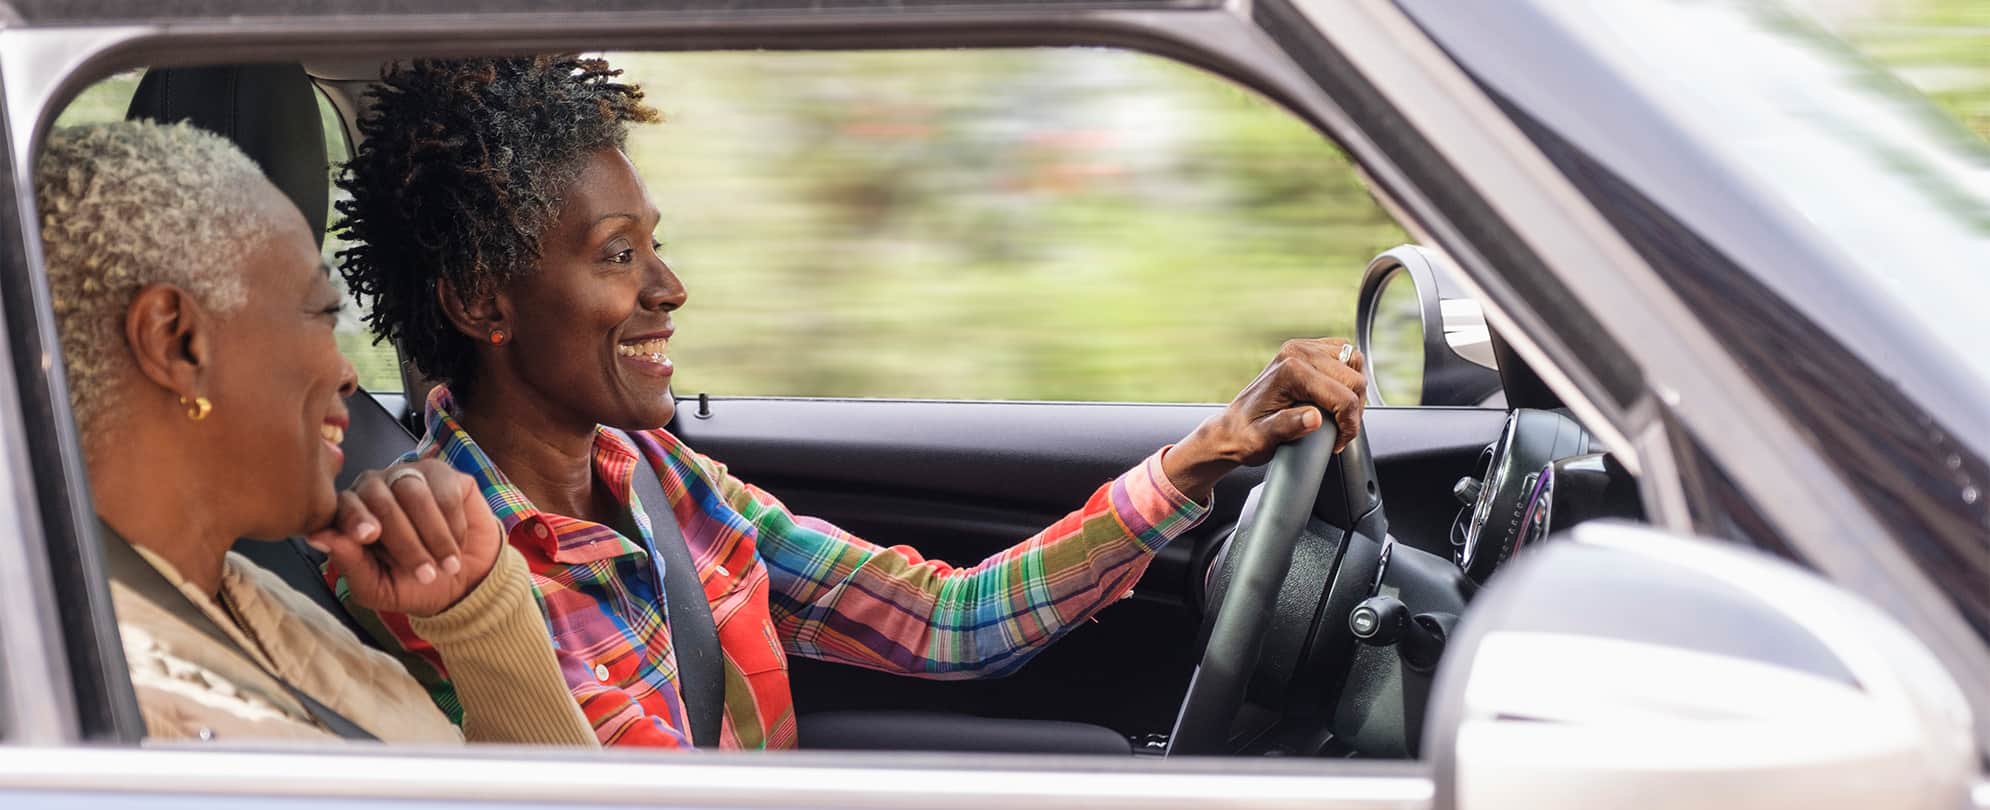 Two smiling women are in a car, one is driving, and the other is in the passenger's seat.